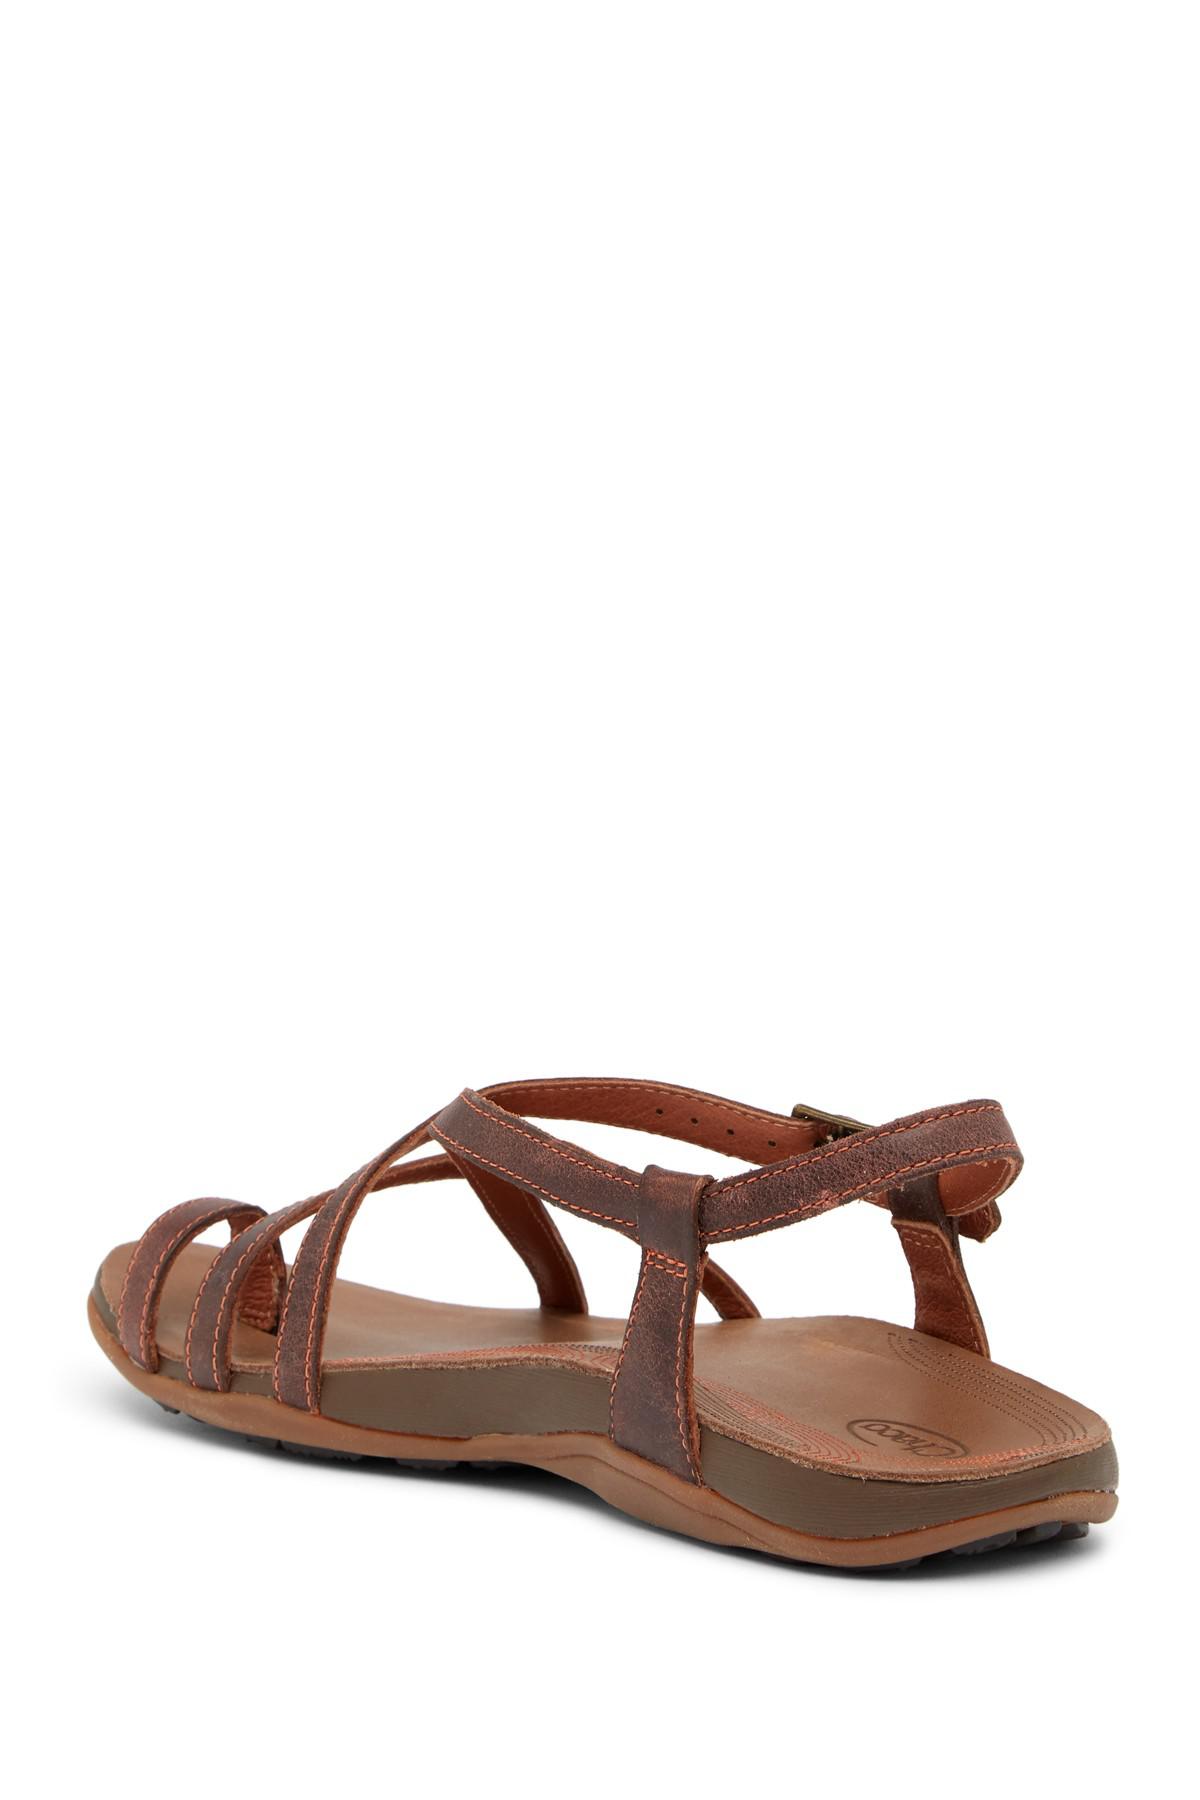 Chaco Dorra Leather Sandal in Brown - Lyst